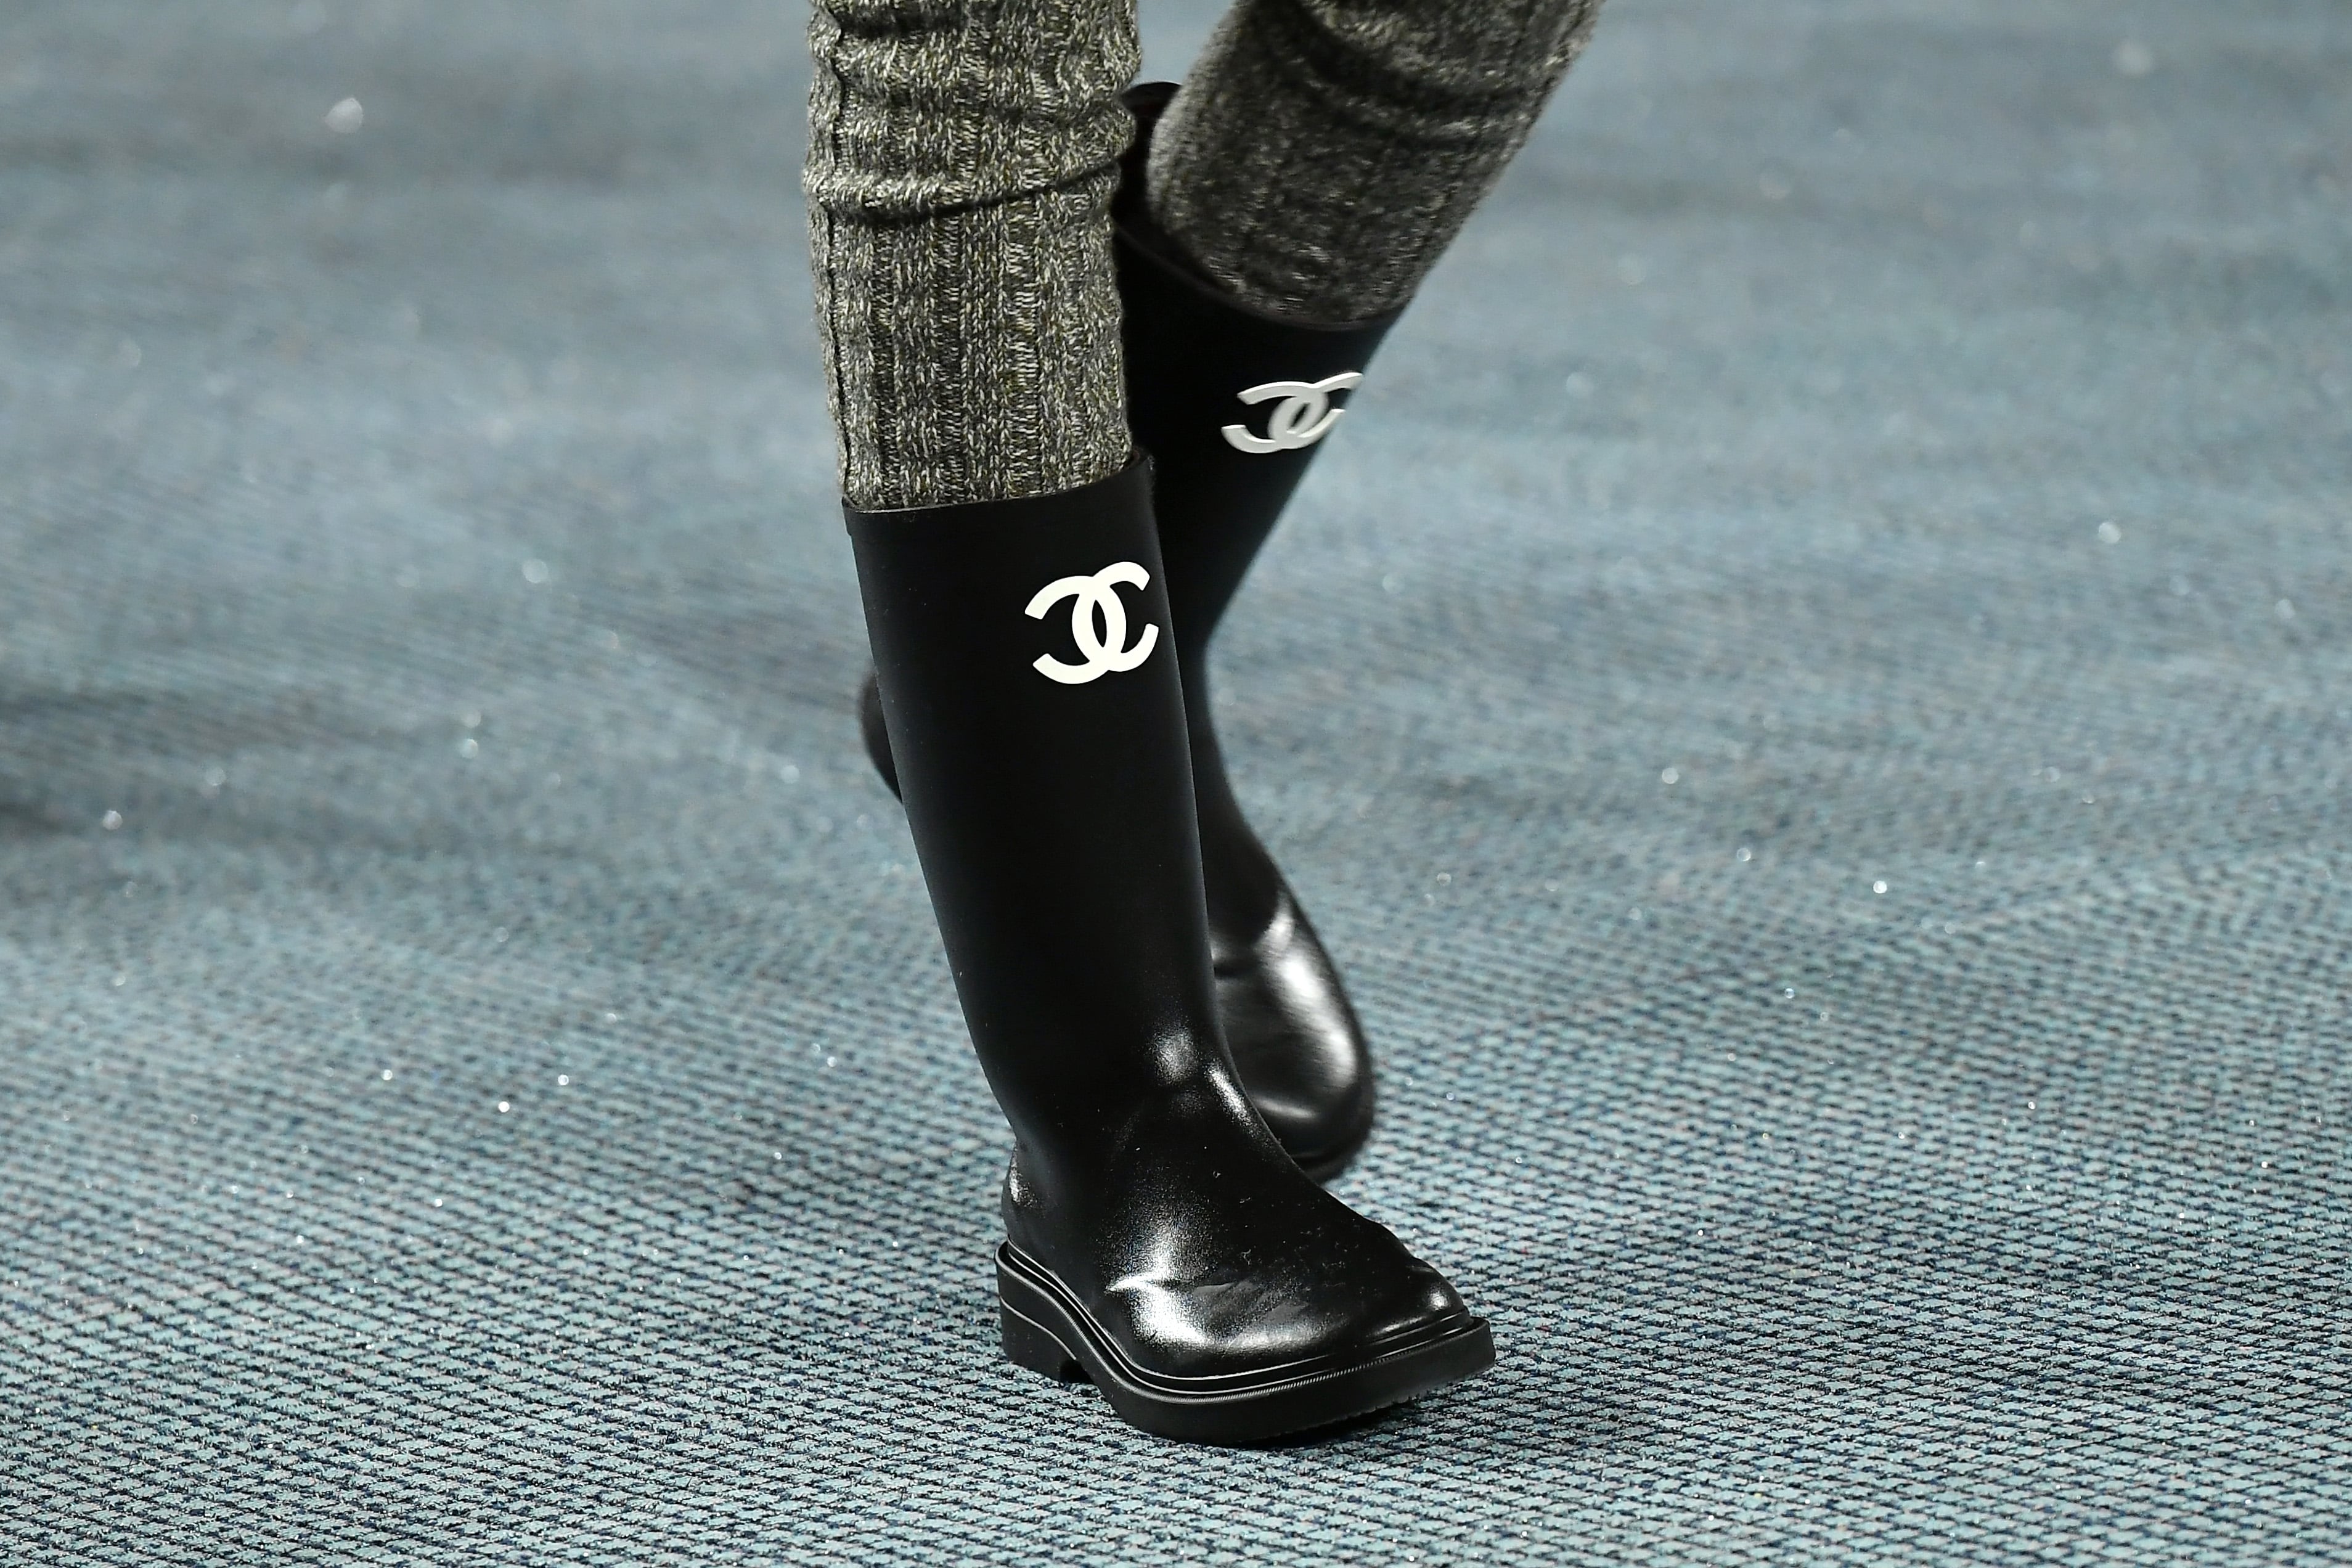 CHANEL, Shoes, Chanel 22k Pull On Rubber Rain Boots Thigh High